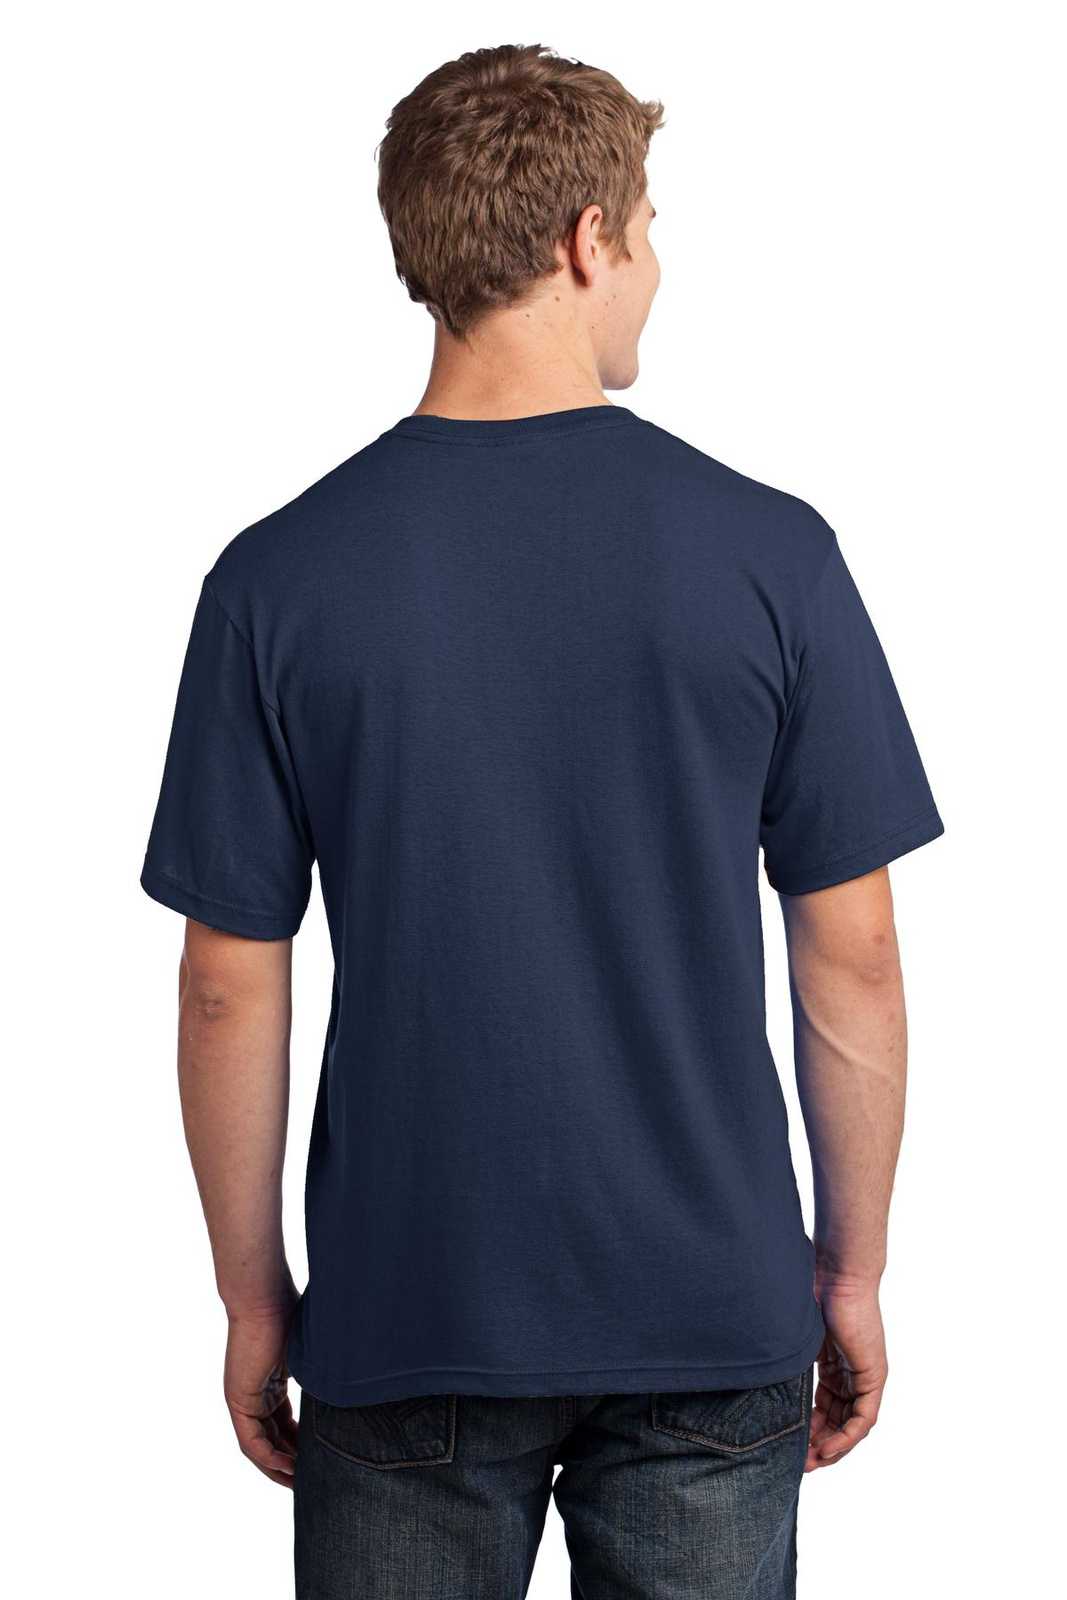 Port &amp; Company USA100P All-American Pocket Tee - Navy - HIT a Double - 2